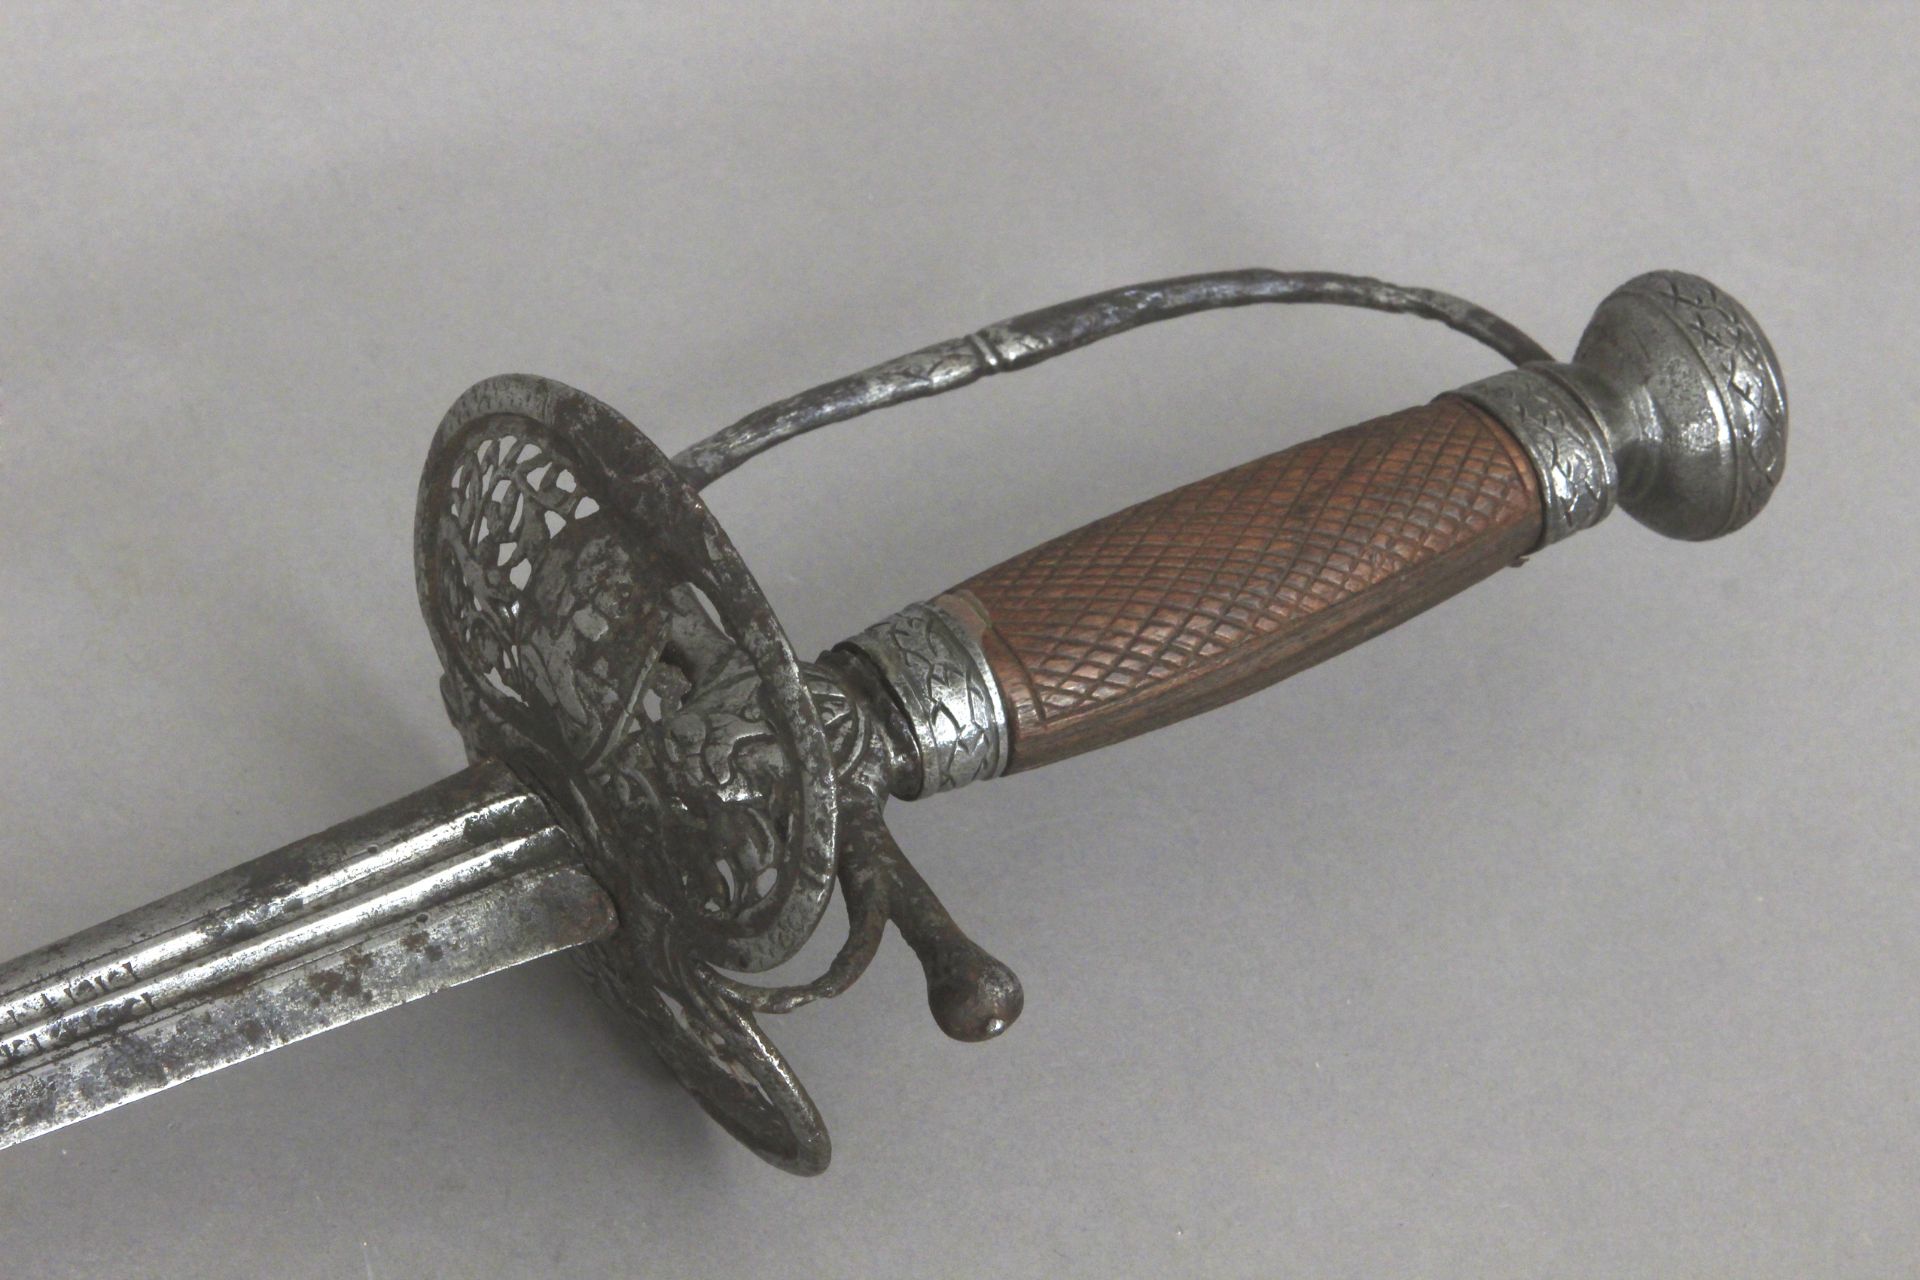 An 18th century ceremonial sword with a blade possibly from Toledo - Image 2 of 5